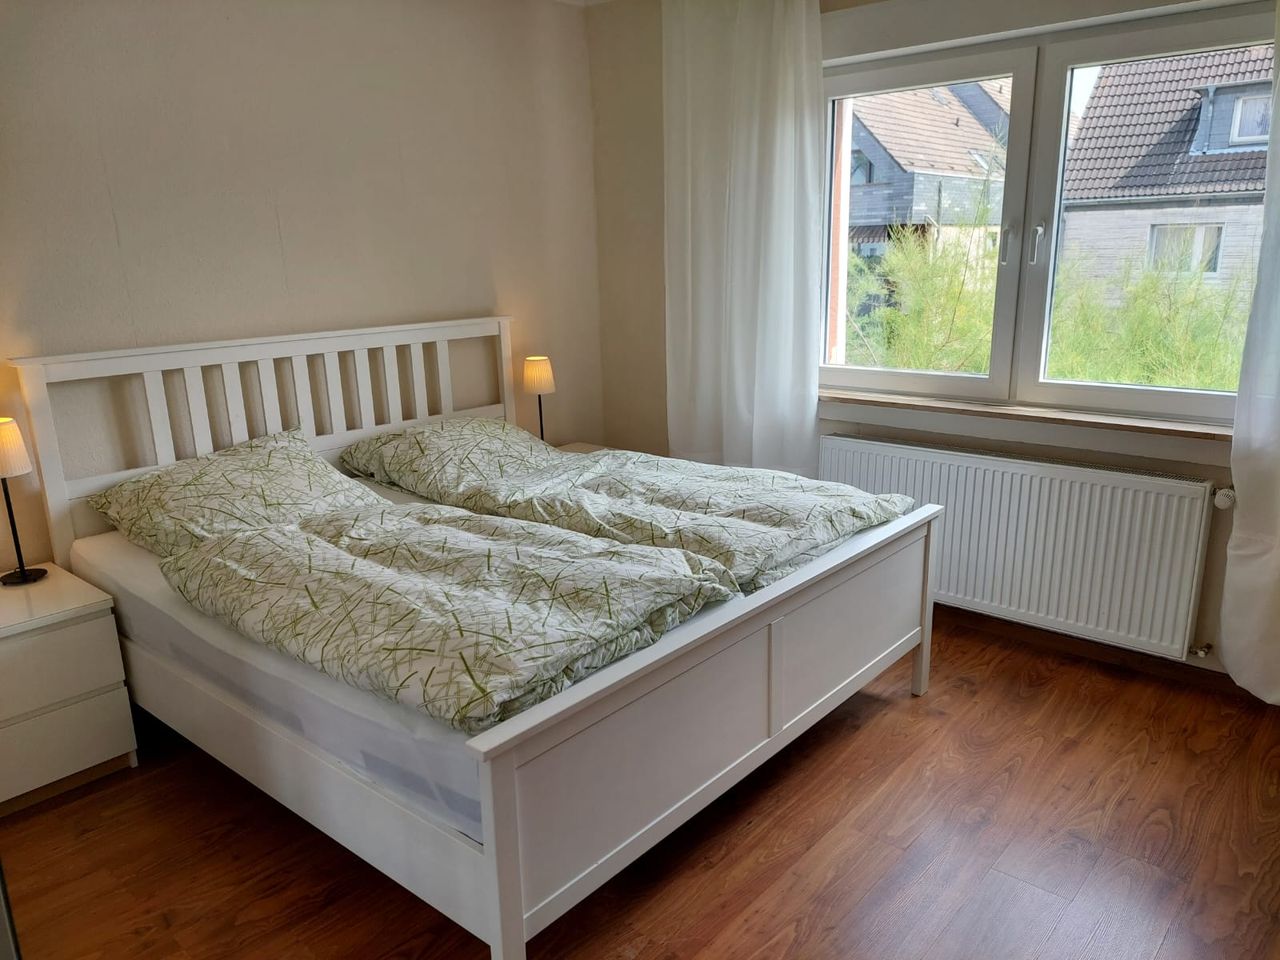 Central and quiet. Large 3 room apartment near Cologne